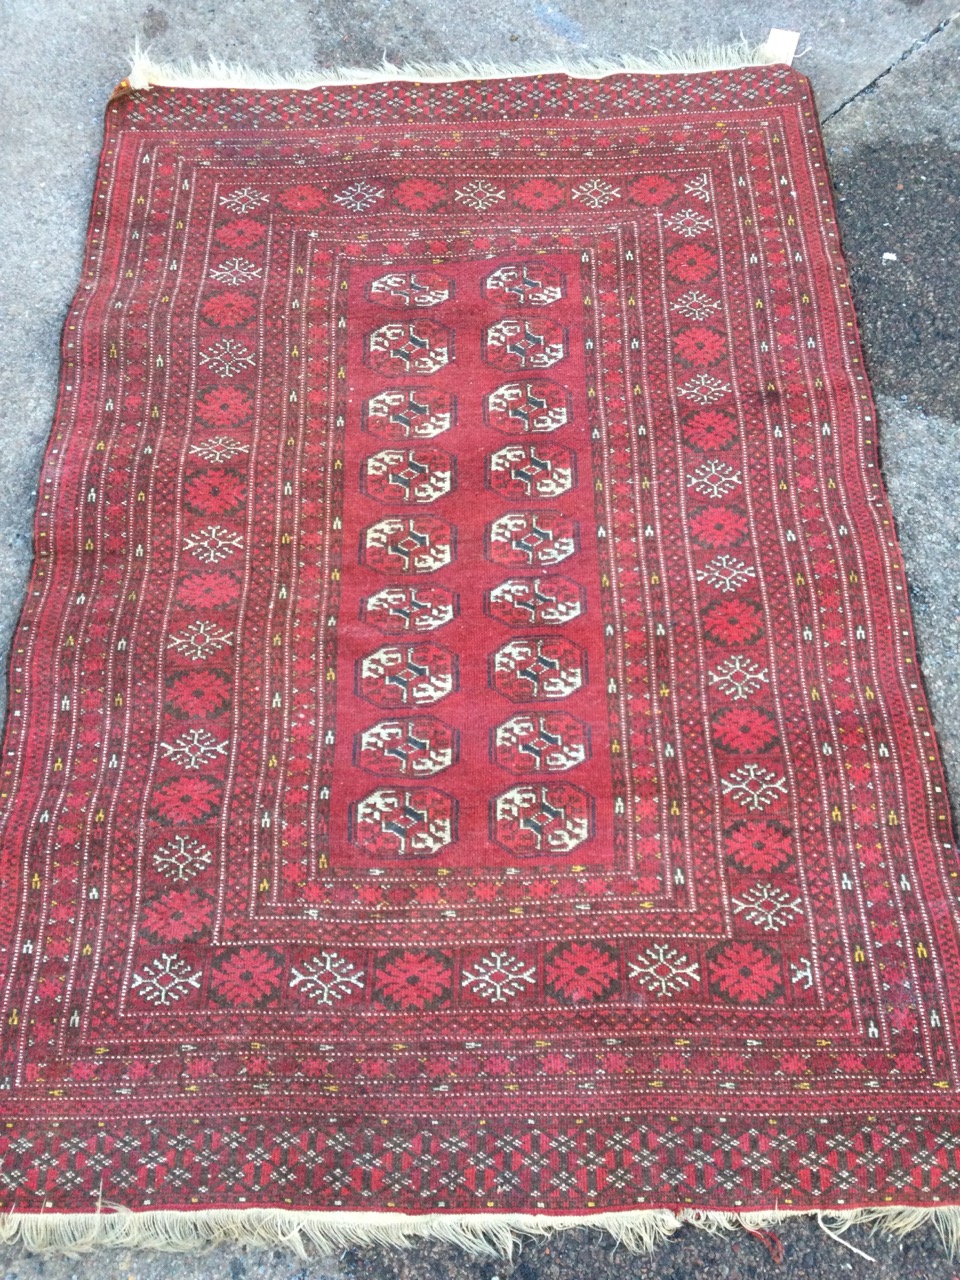 An Afghan rug woven with field of eighteen octagonal lozenges within multiple floral borders, the